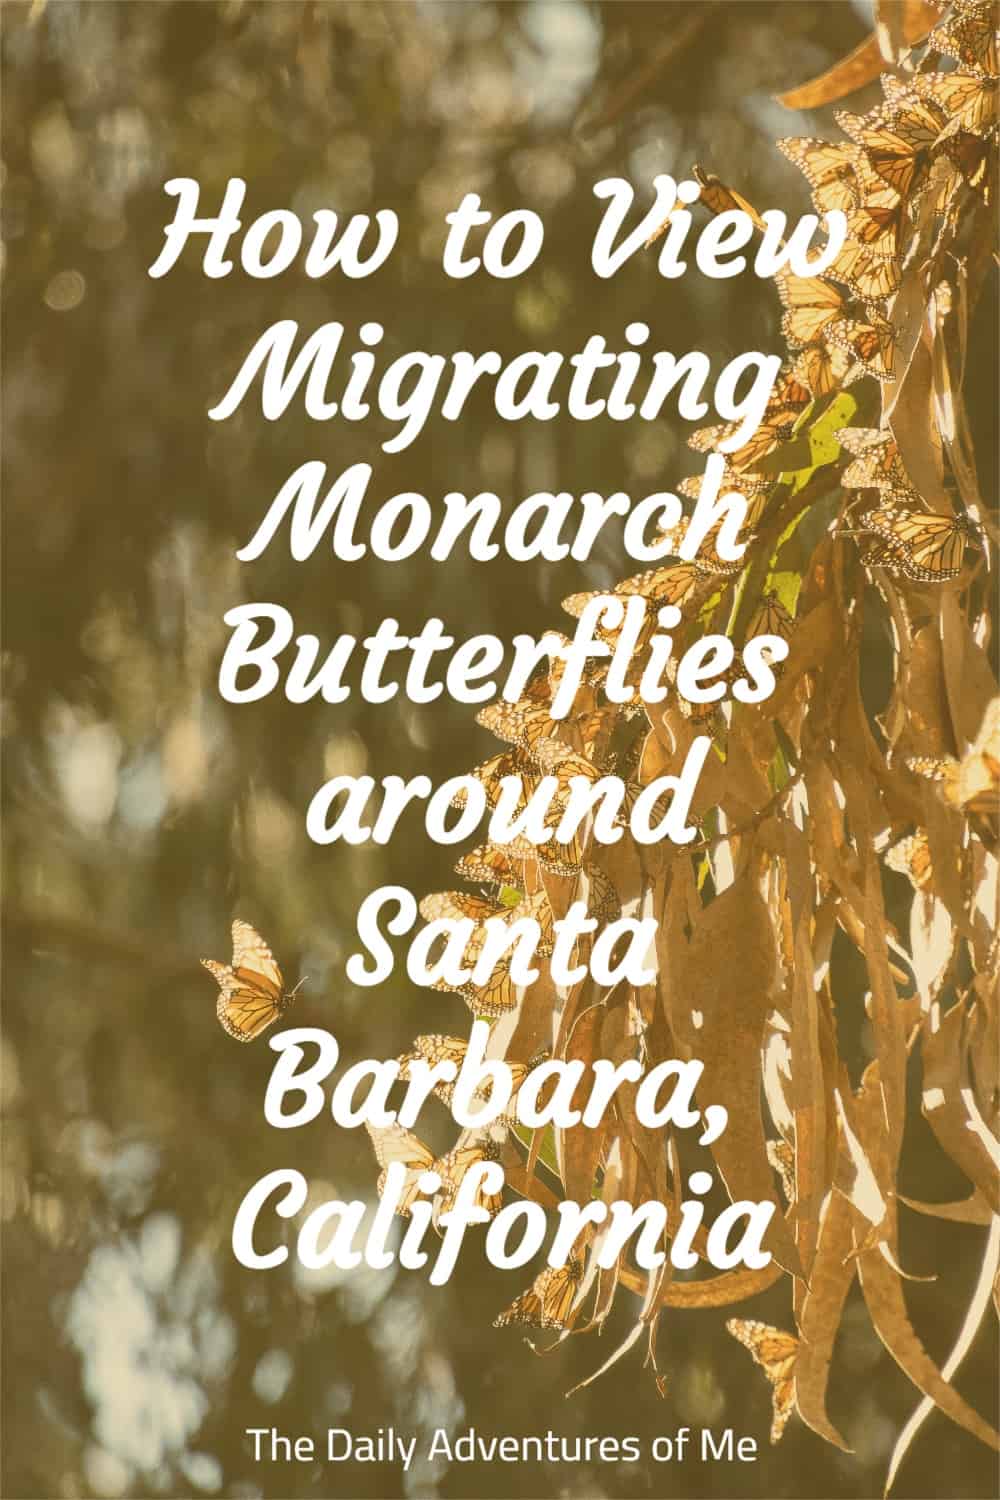 If you are visiting Santa Barbara from November to February, head out to see the migrating Monarch Butterflies. Read on to for the details on how to do it. #MonarchButterflies #thingstodoinCalifornia #GoletaCalifornia